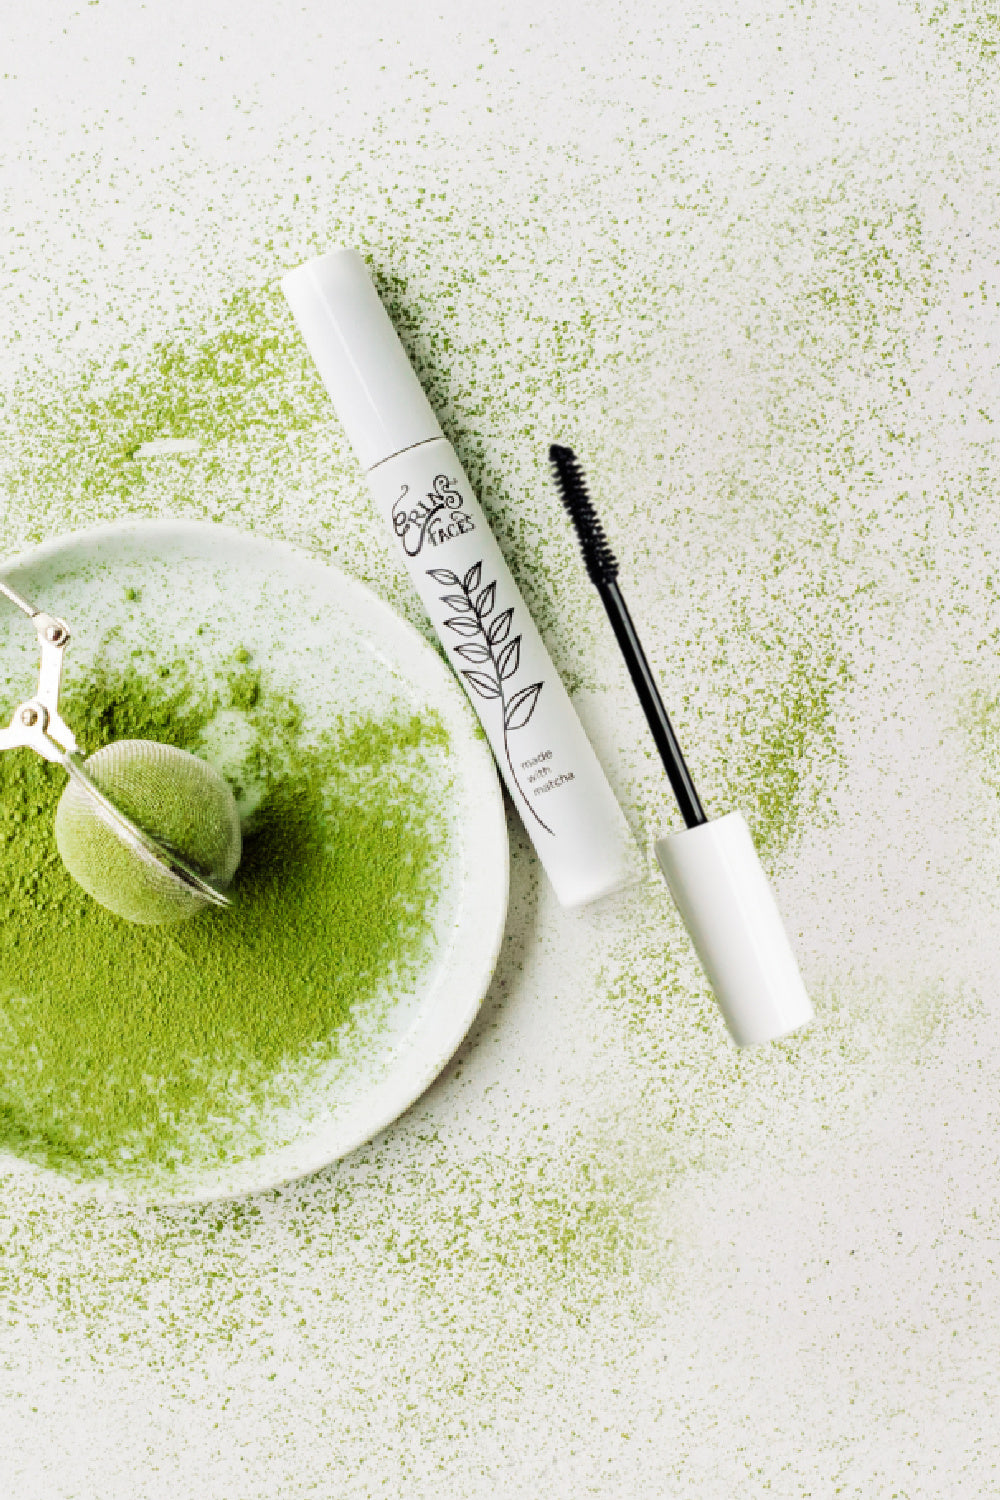 green tea, matcha, is powdered on a white surface with a white plate and tea sifter alongside white tubes of matcha mascara from erin's faces